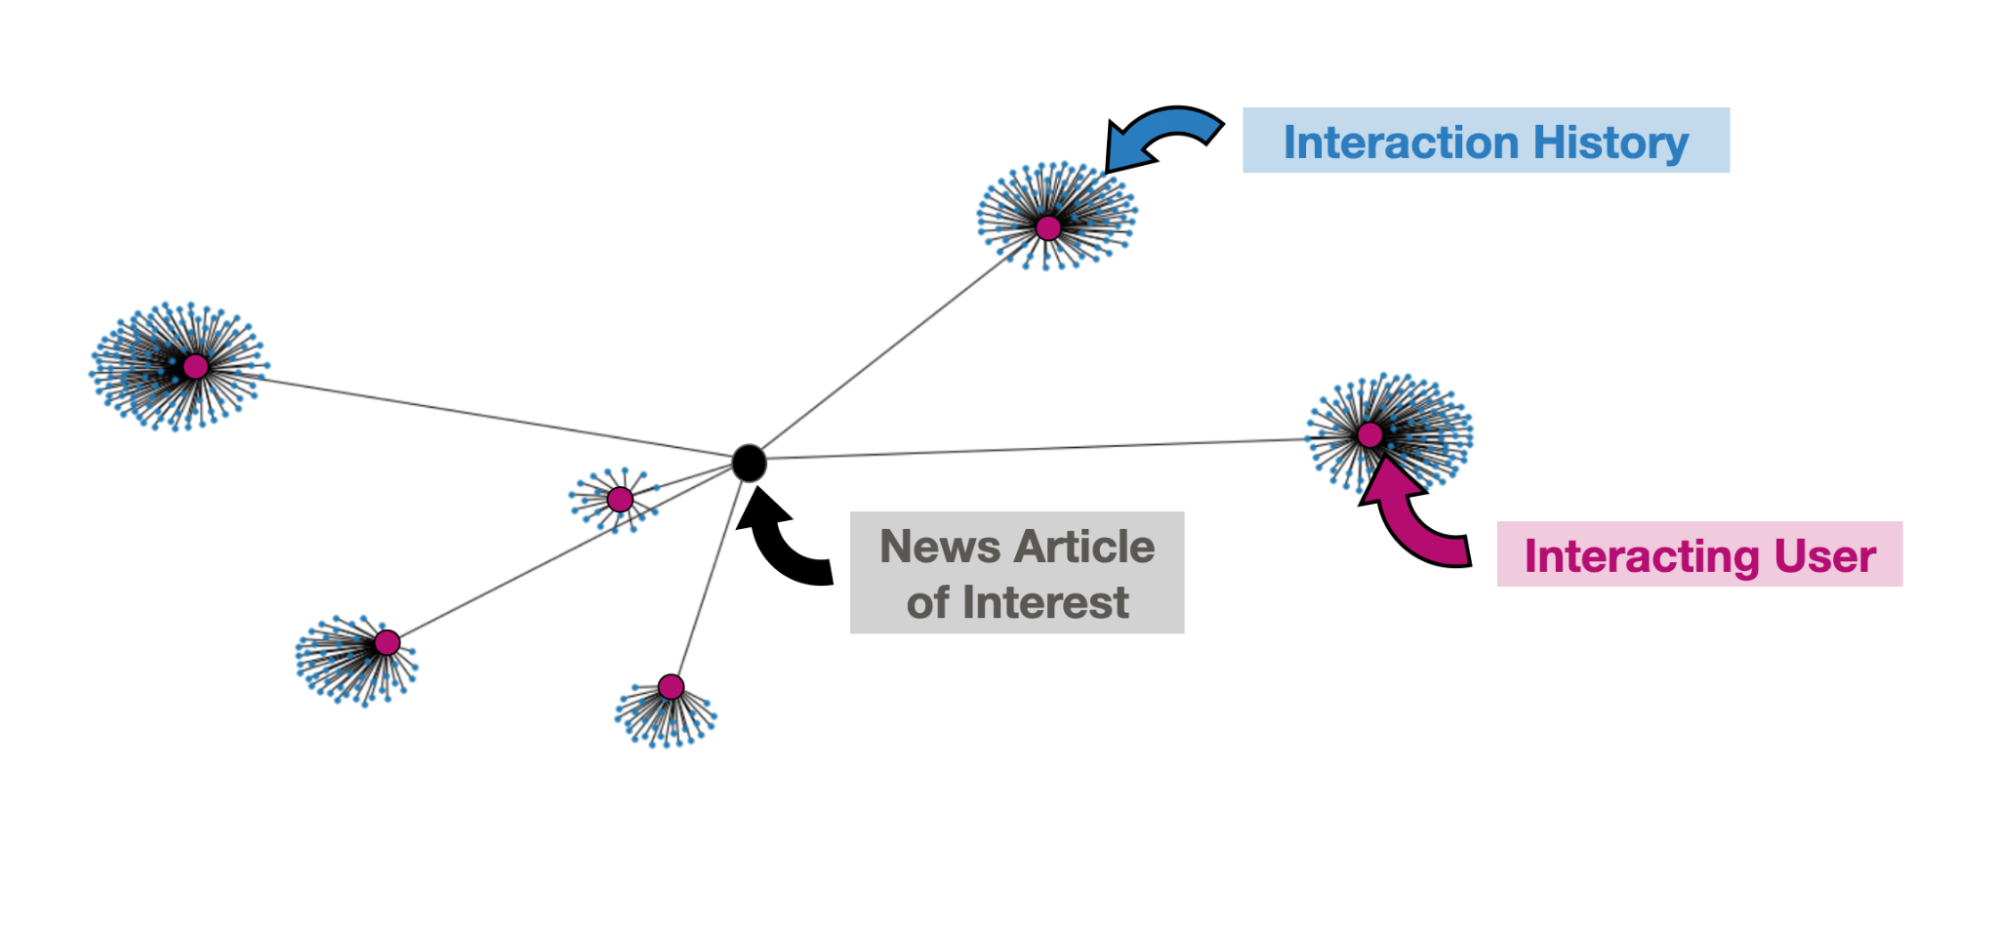 map showing interaction between the news article of interest, the interacting user, and interaction history